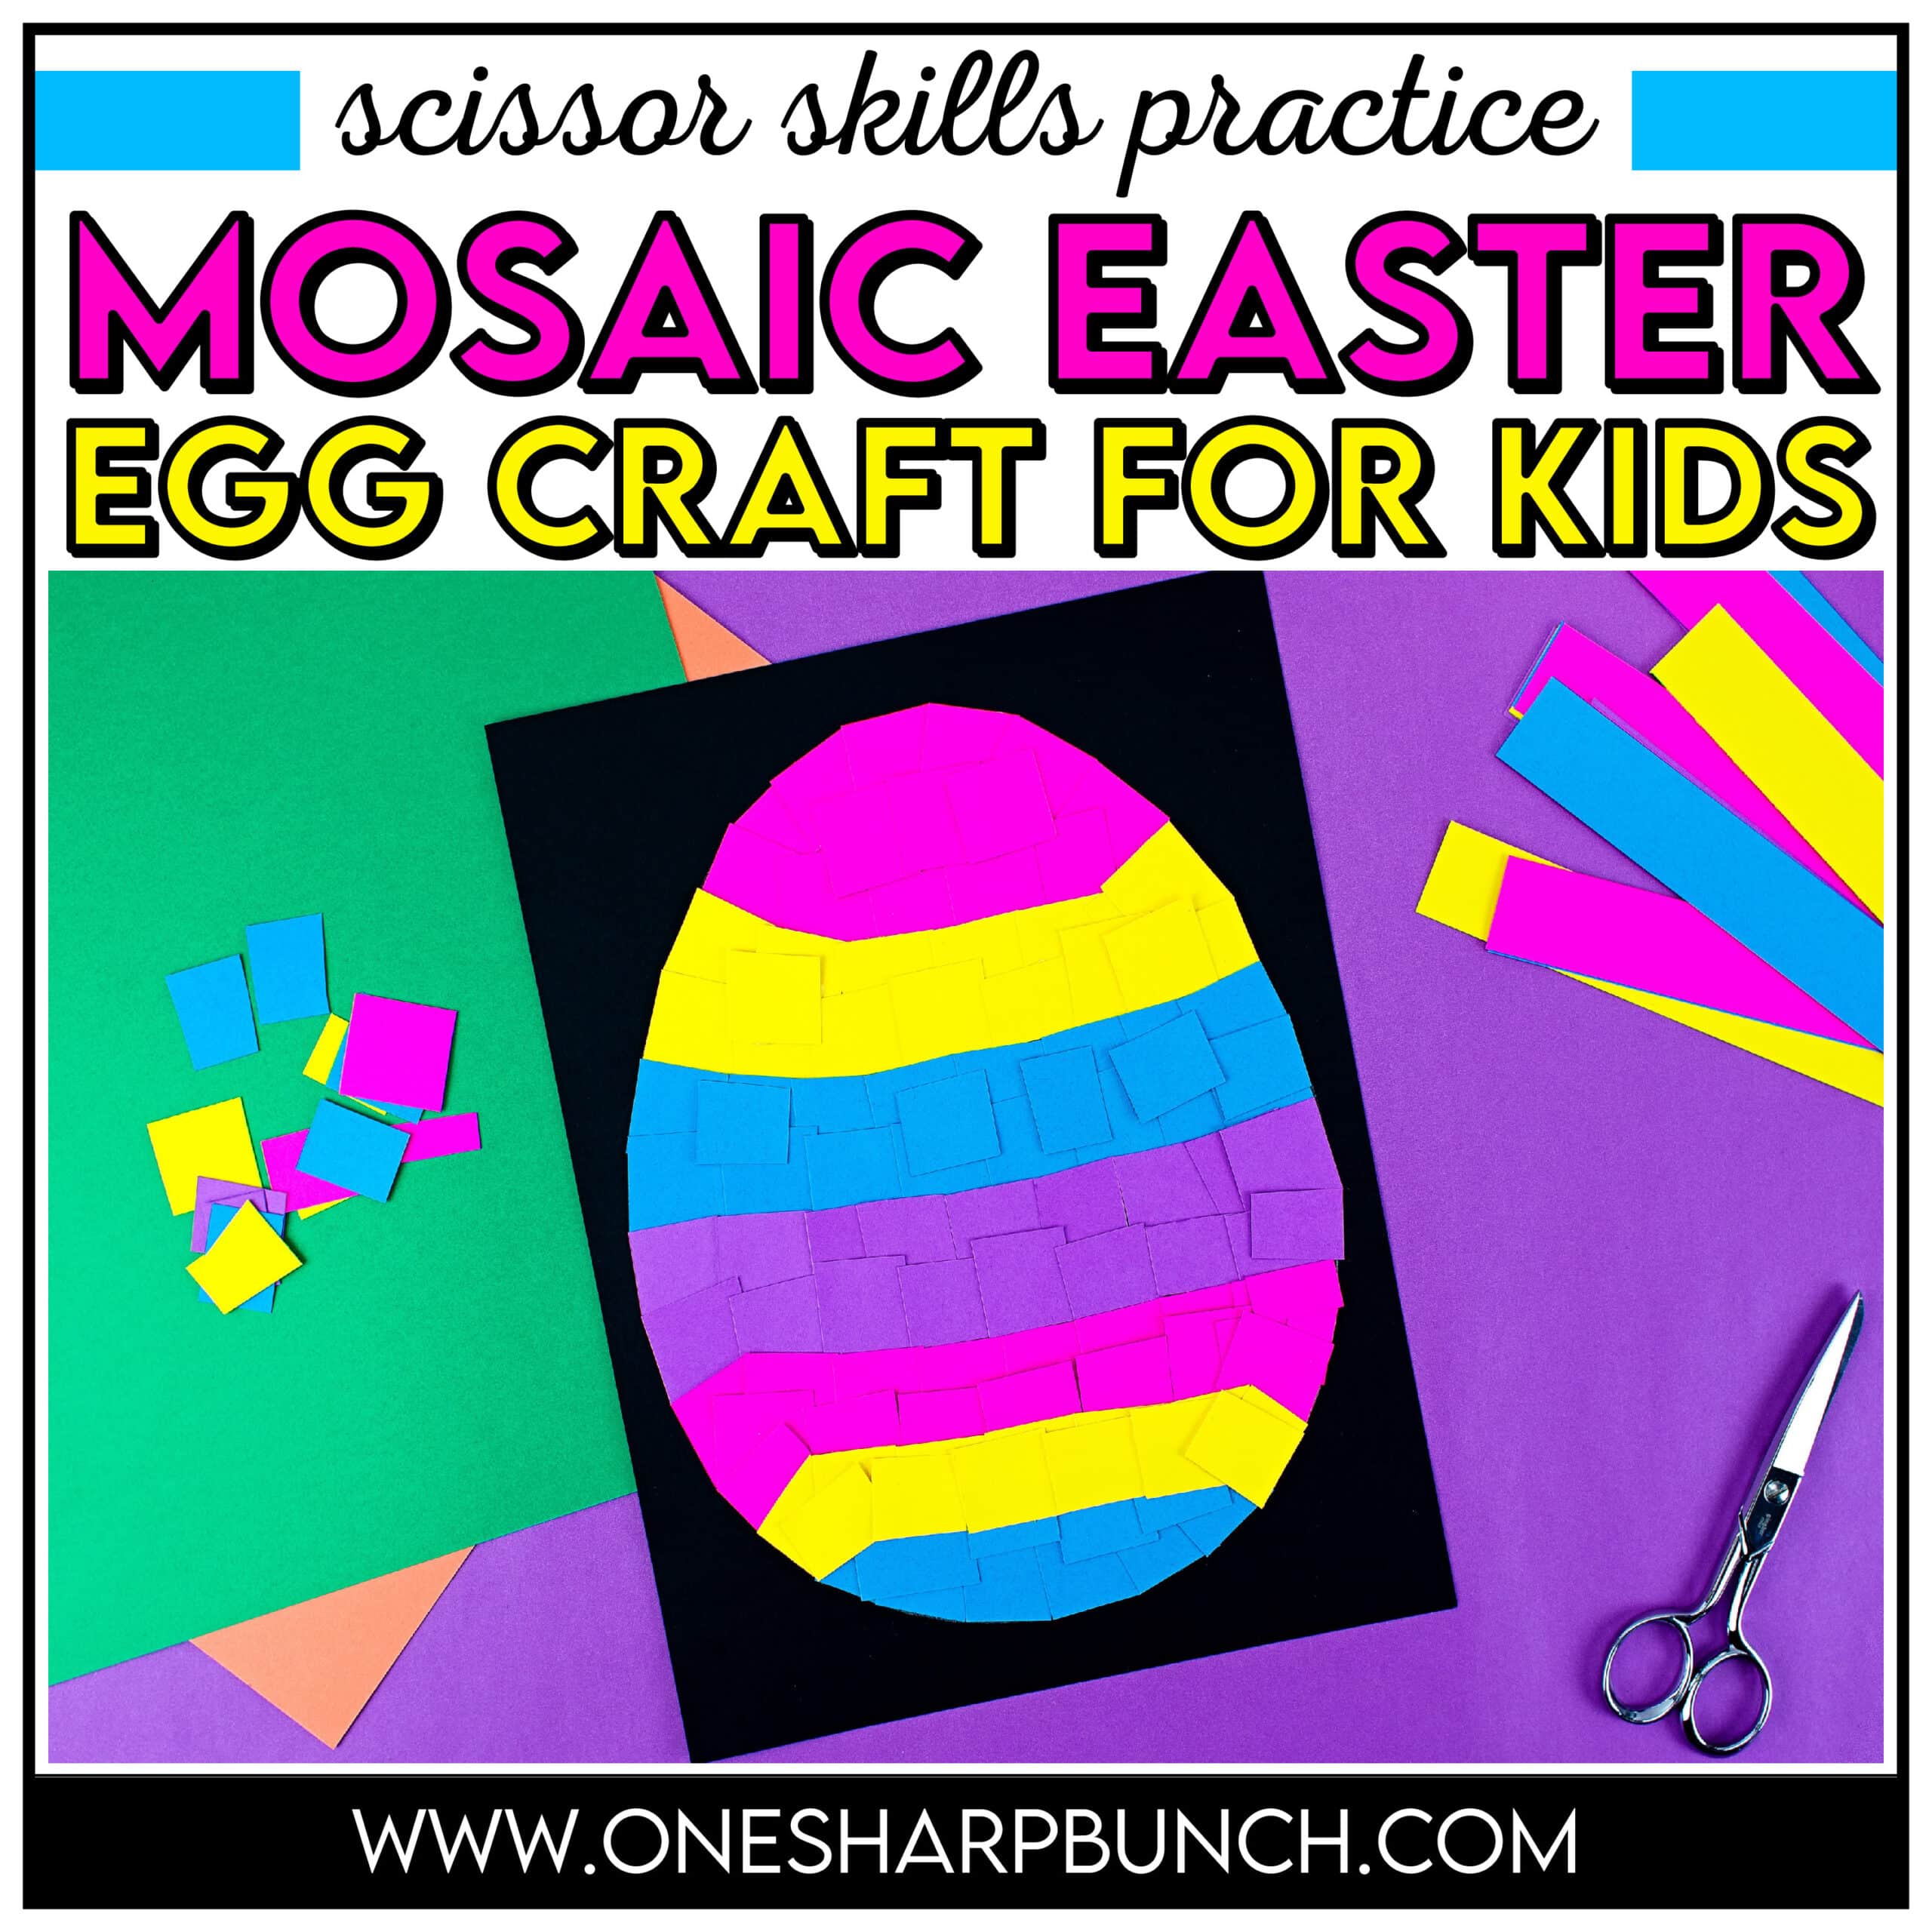 Embrace the arrival of spring, as you strengthen fine motor skills, with this simple mosaic Easter egg craft for kids! These Easter egg crafts are great for practicing scissor skills and gluing skills. Complete these Easter crafts for scissor cutting activities with preschool and kindergarten students. Try these Easter crafts for kids as easy spring activities for Easter centers or spring fine motor activities. Plus, pair these spring crafts with any of your favorite Easter books for kids!